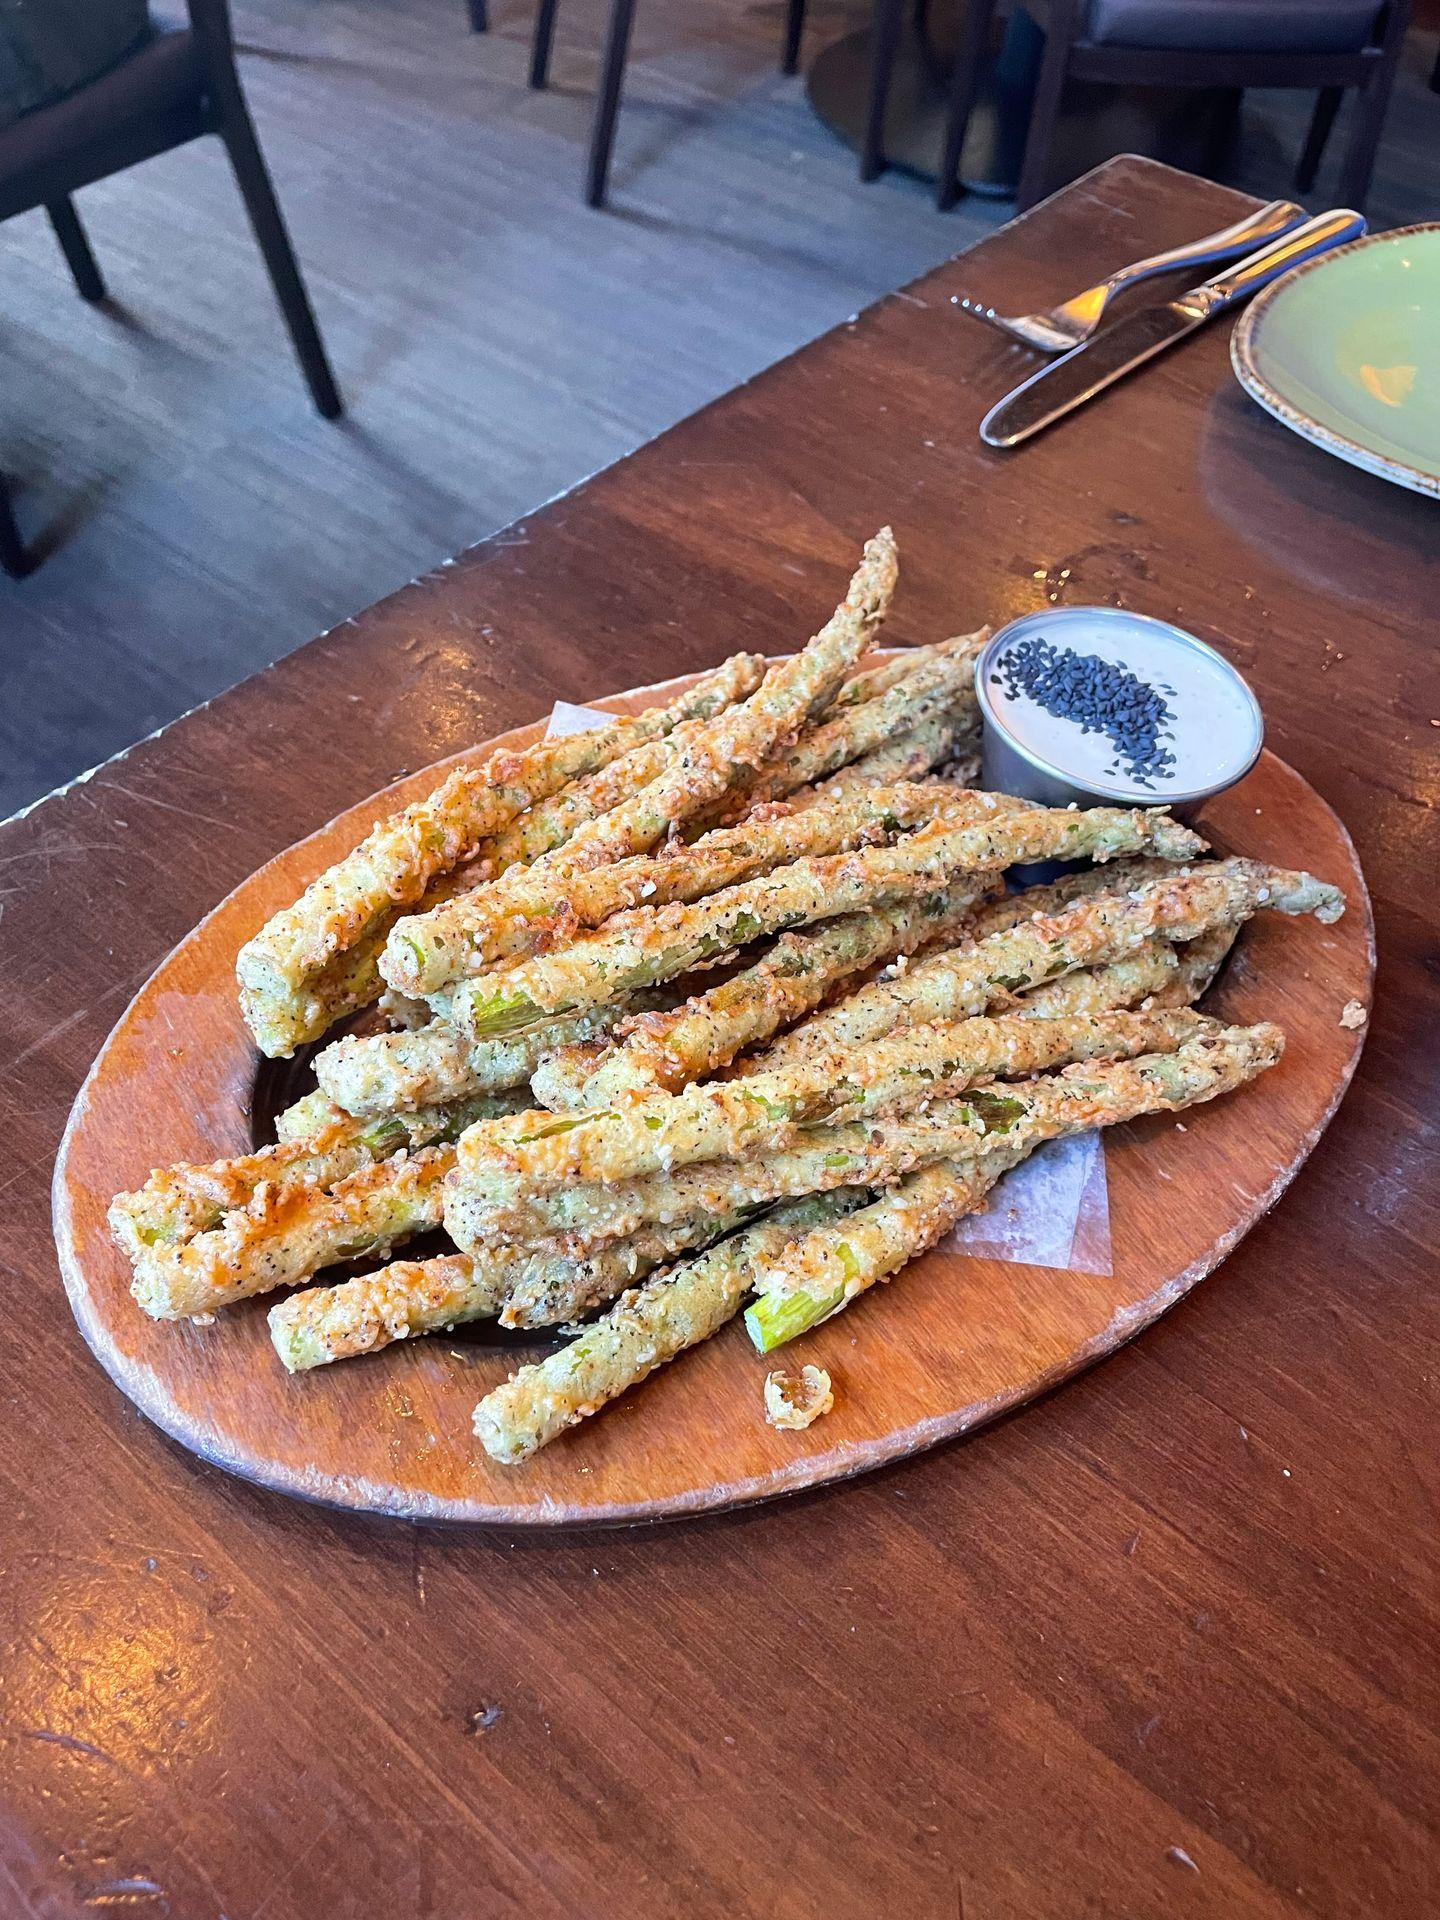 A plate of fried asparagus from Boise.